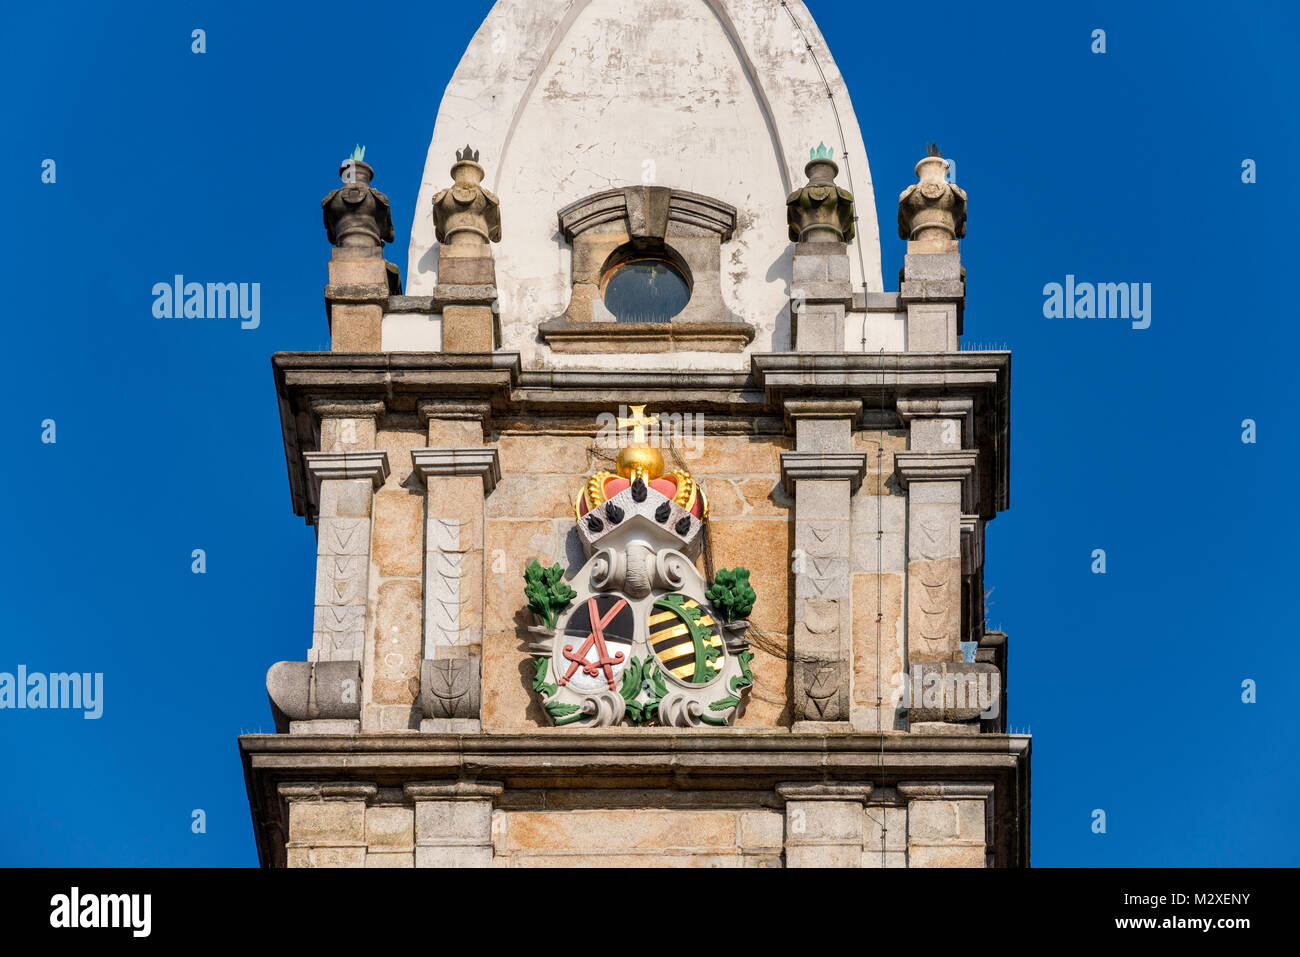 Coat of arms of Electorate of Saxony at Reichenturm (Tower of the Rich), leaning tower in Bautzen, Upper Lusatia region of Saxony, Germany Stock Photo